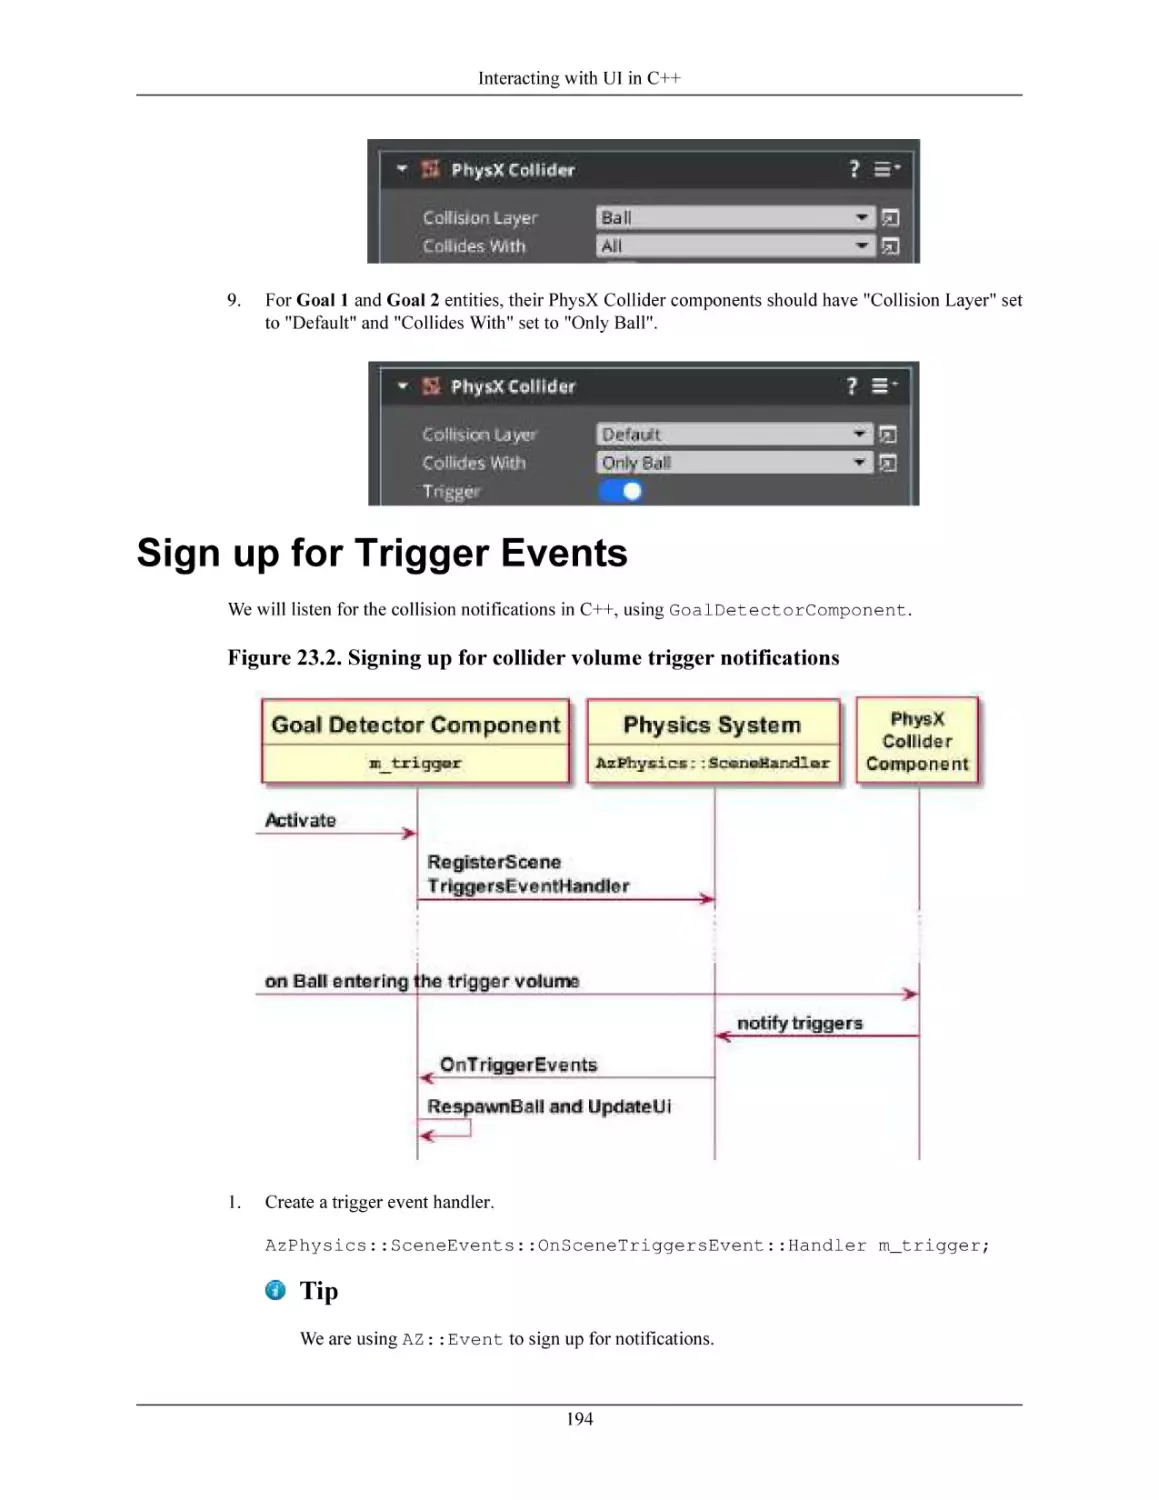 Sign up for Trigger Events